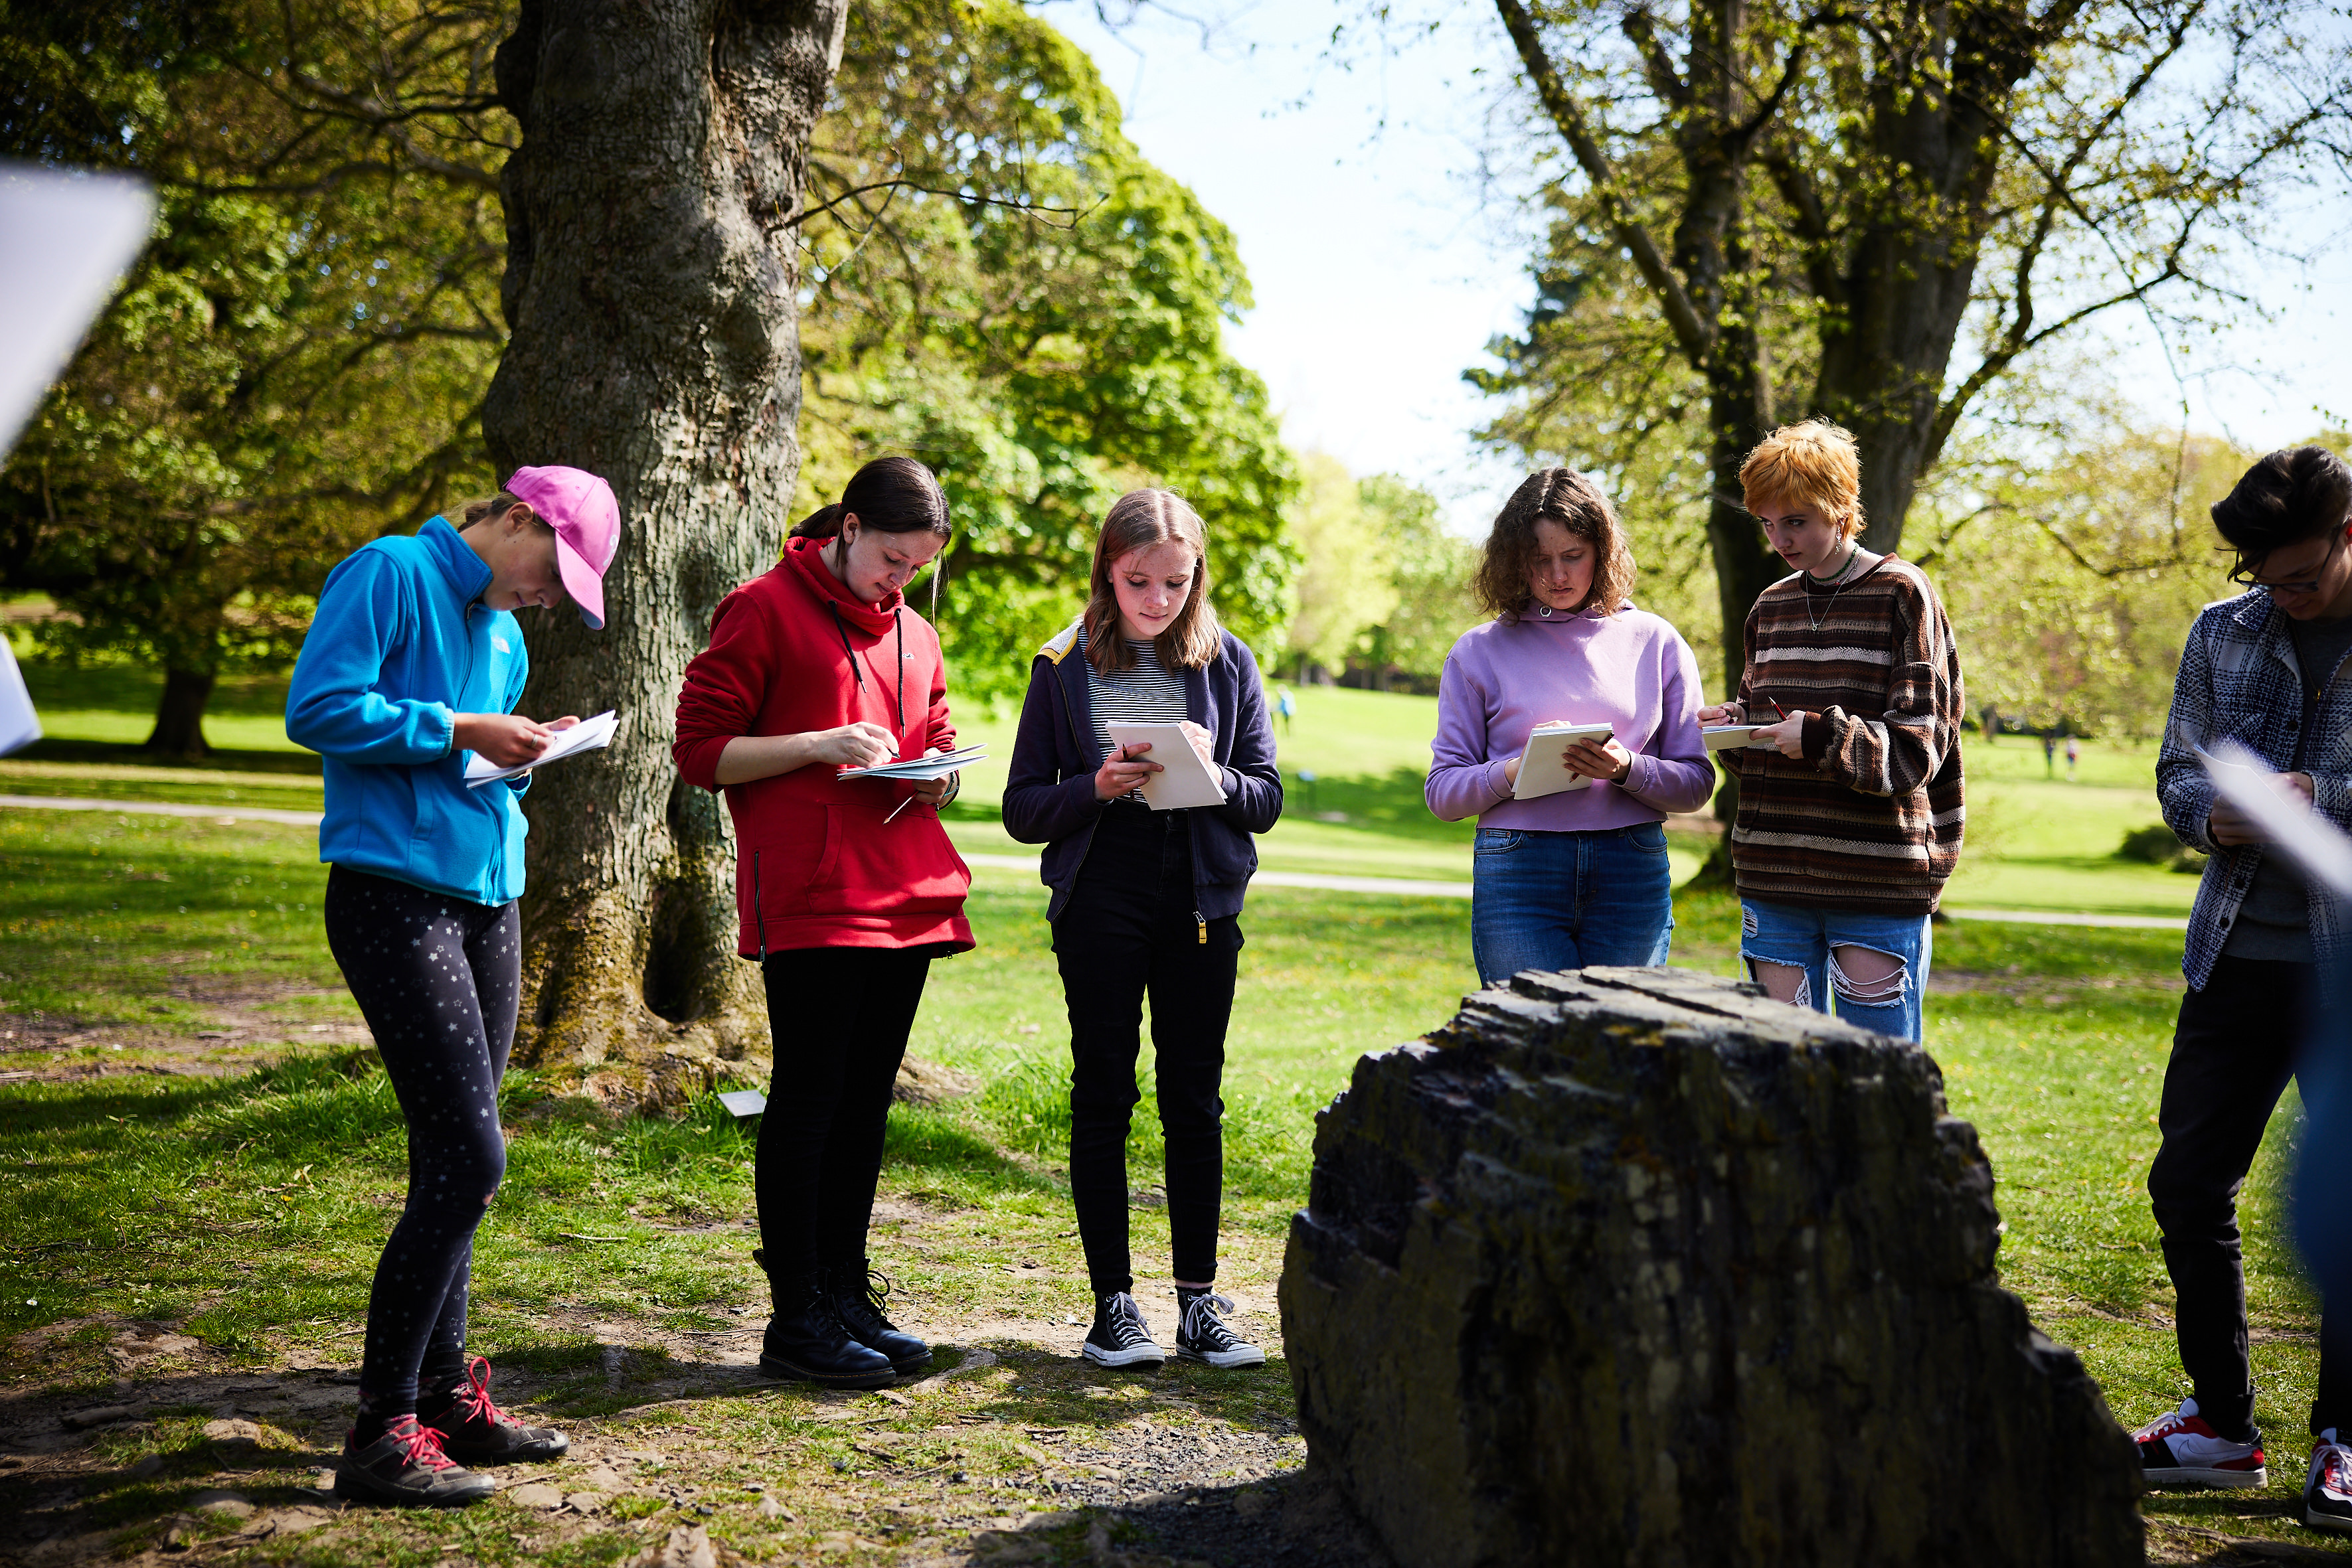 A group of young people holding sketchbooks, looking at a stone artwork in the landscape